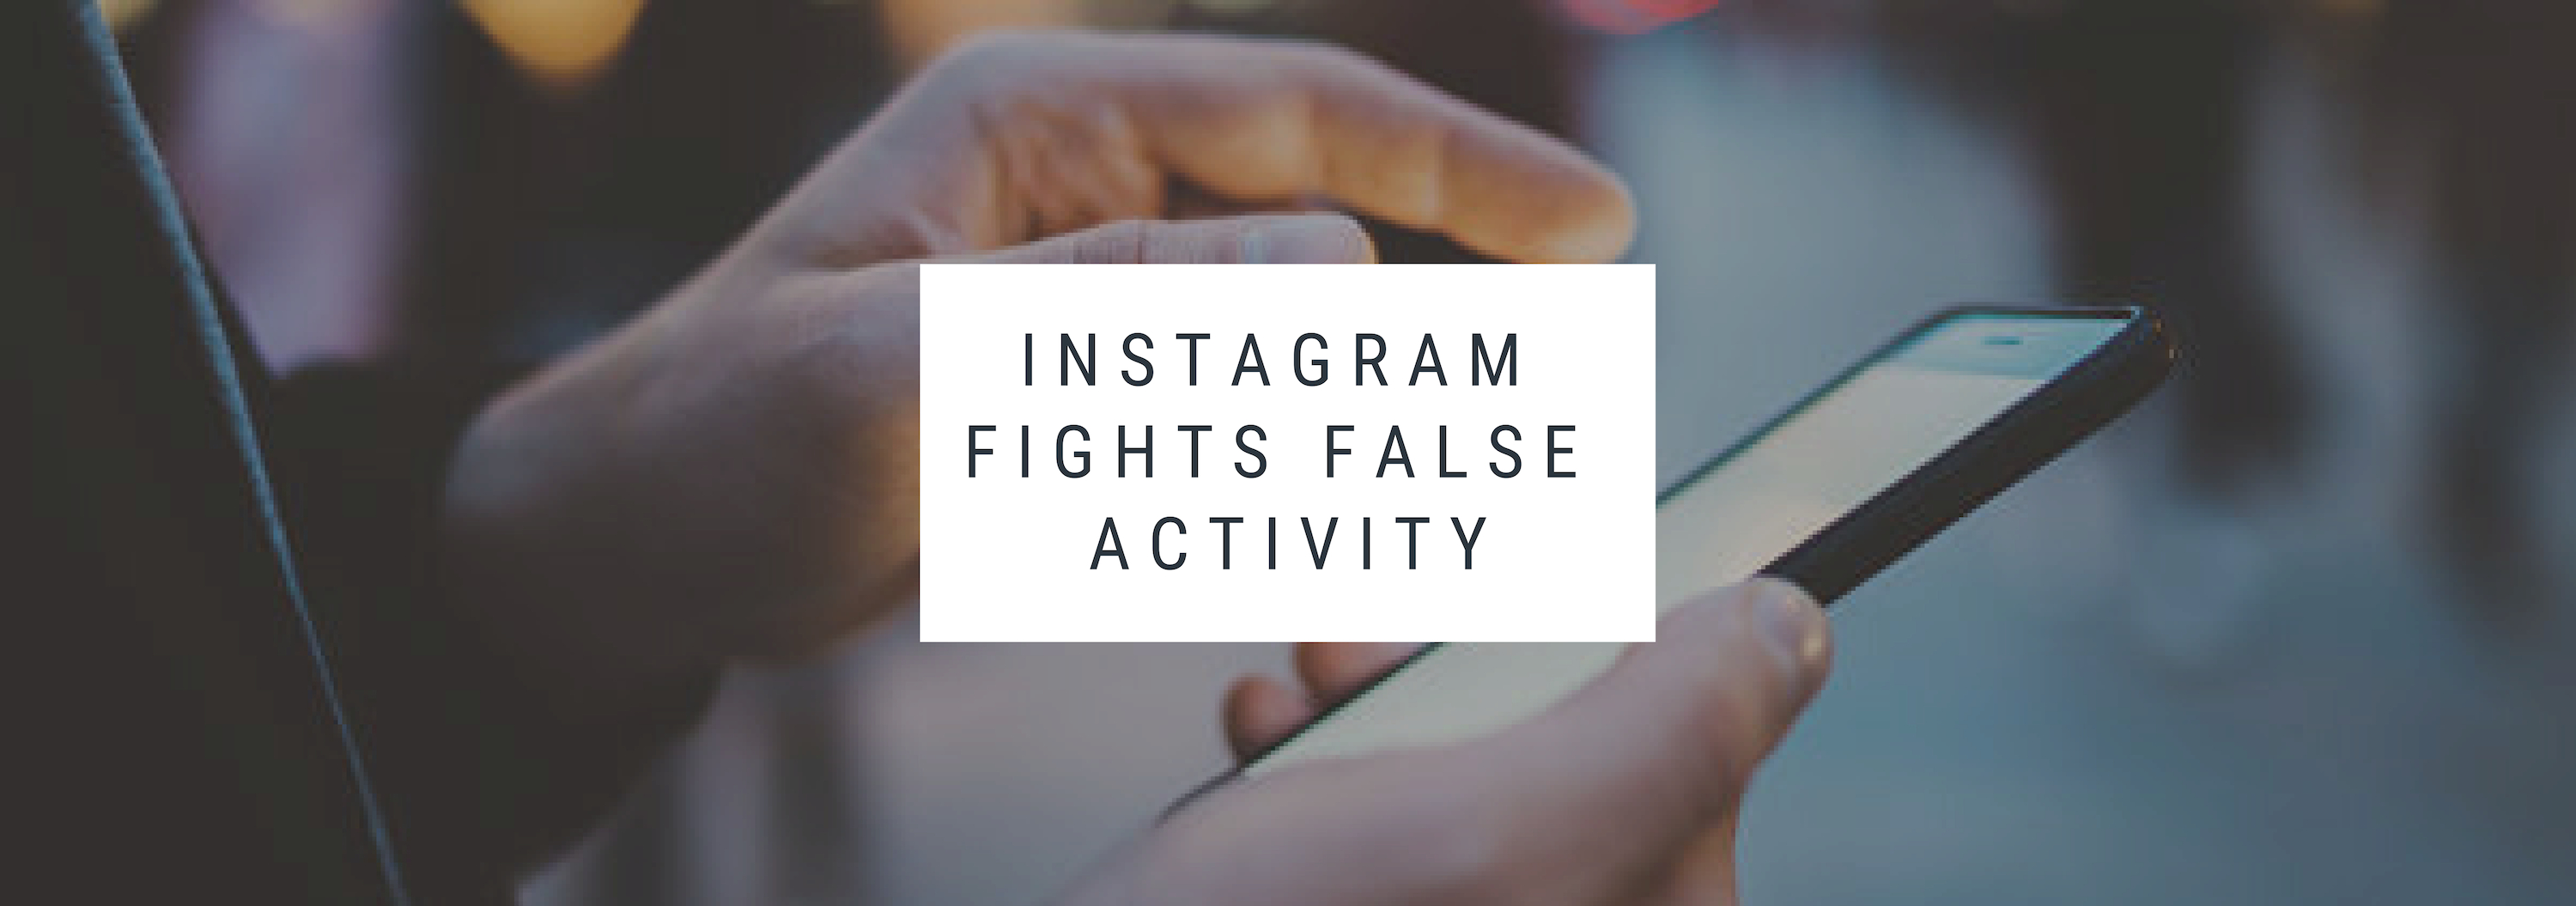 Instagram fights false activity: bots, cheating, and fake profiles